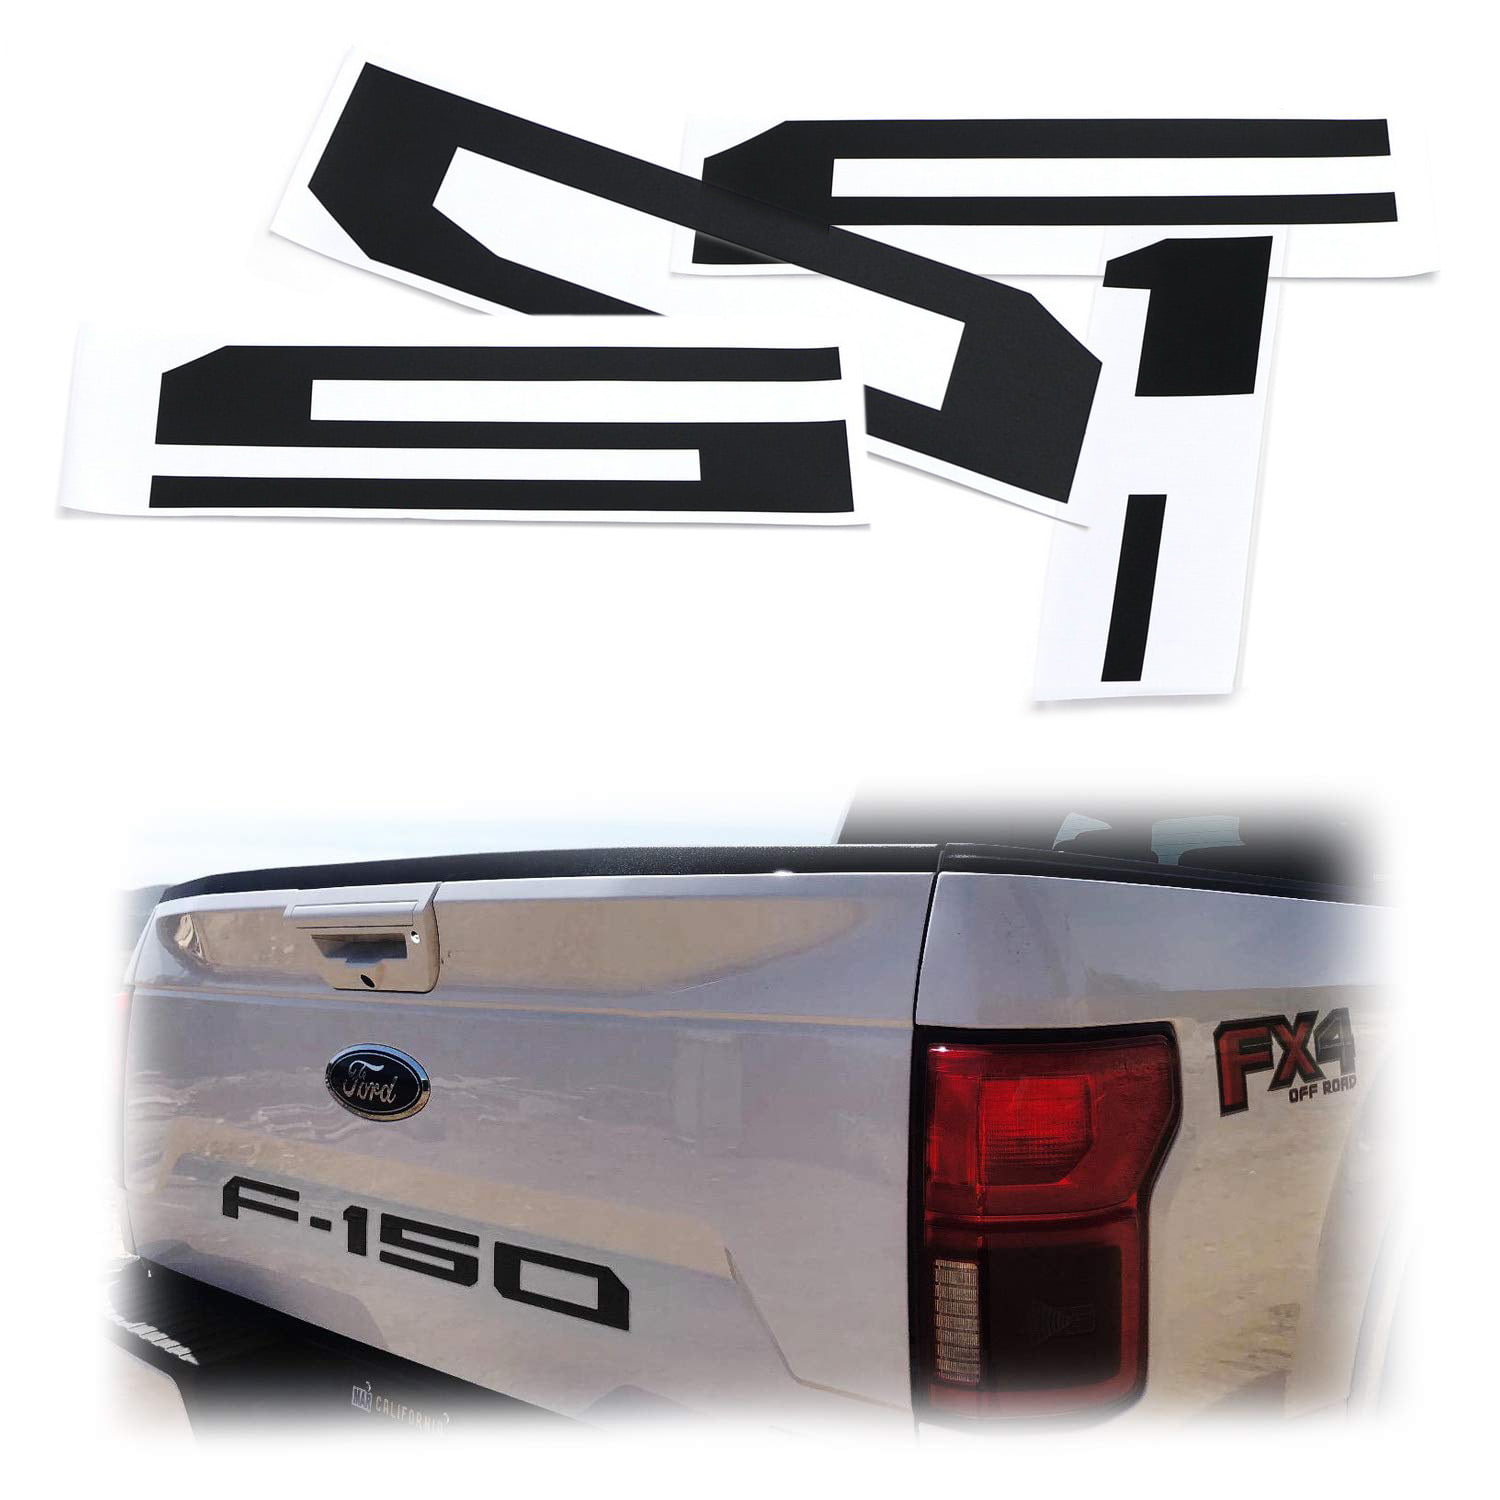 2017 Ford F250 Super Duty Tailgate Letters Decals Stickers AMERICAN FLAG WORN